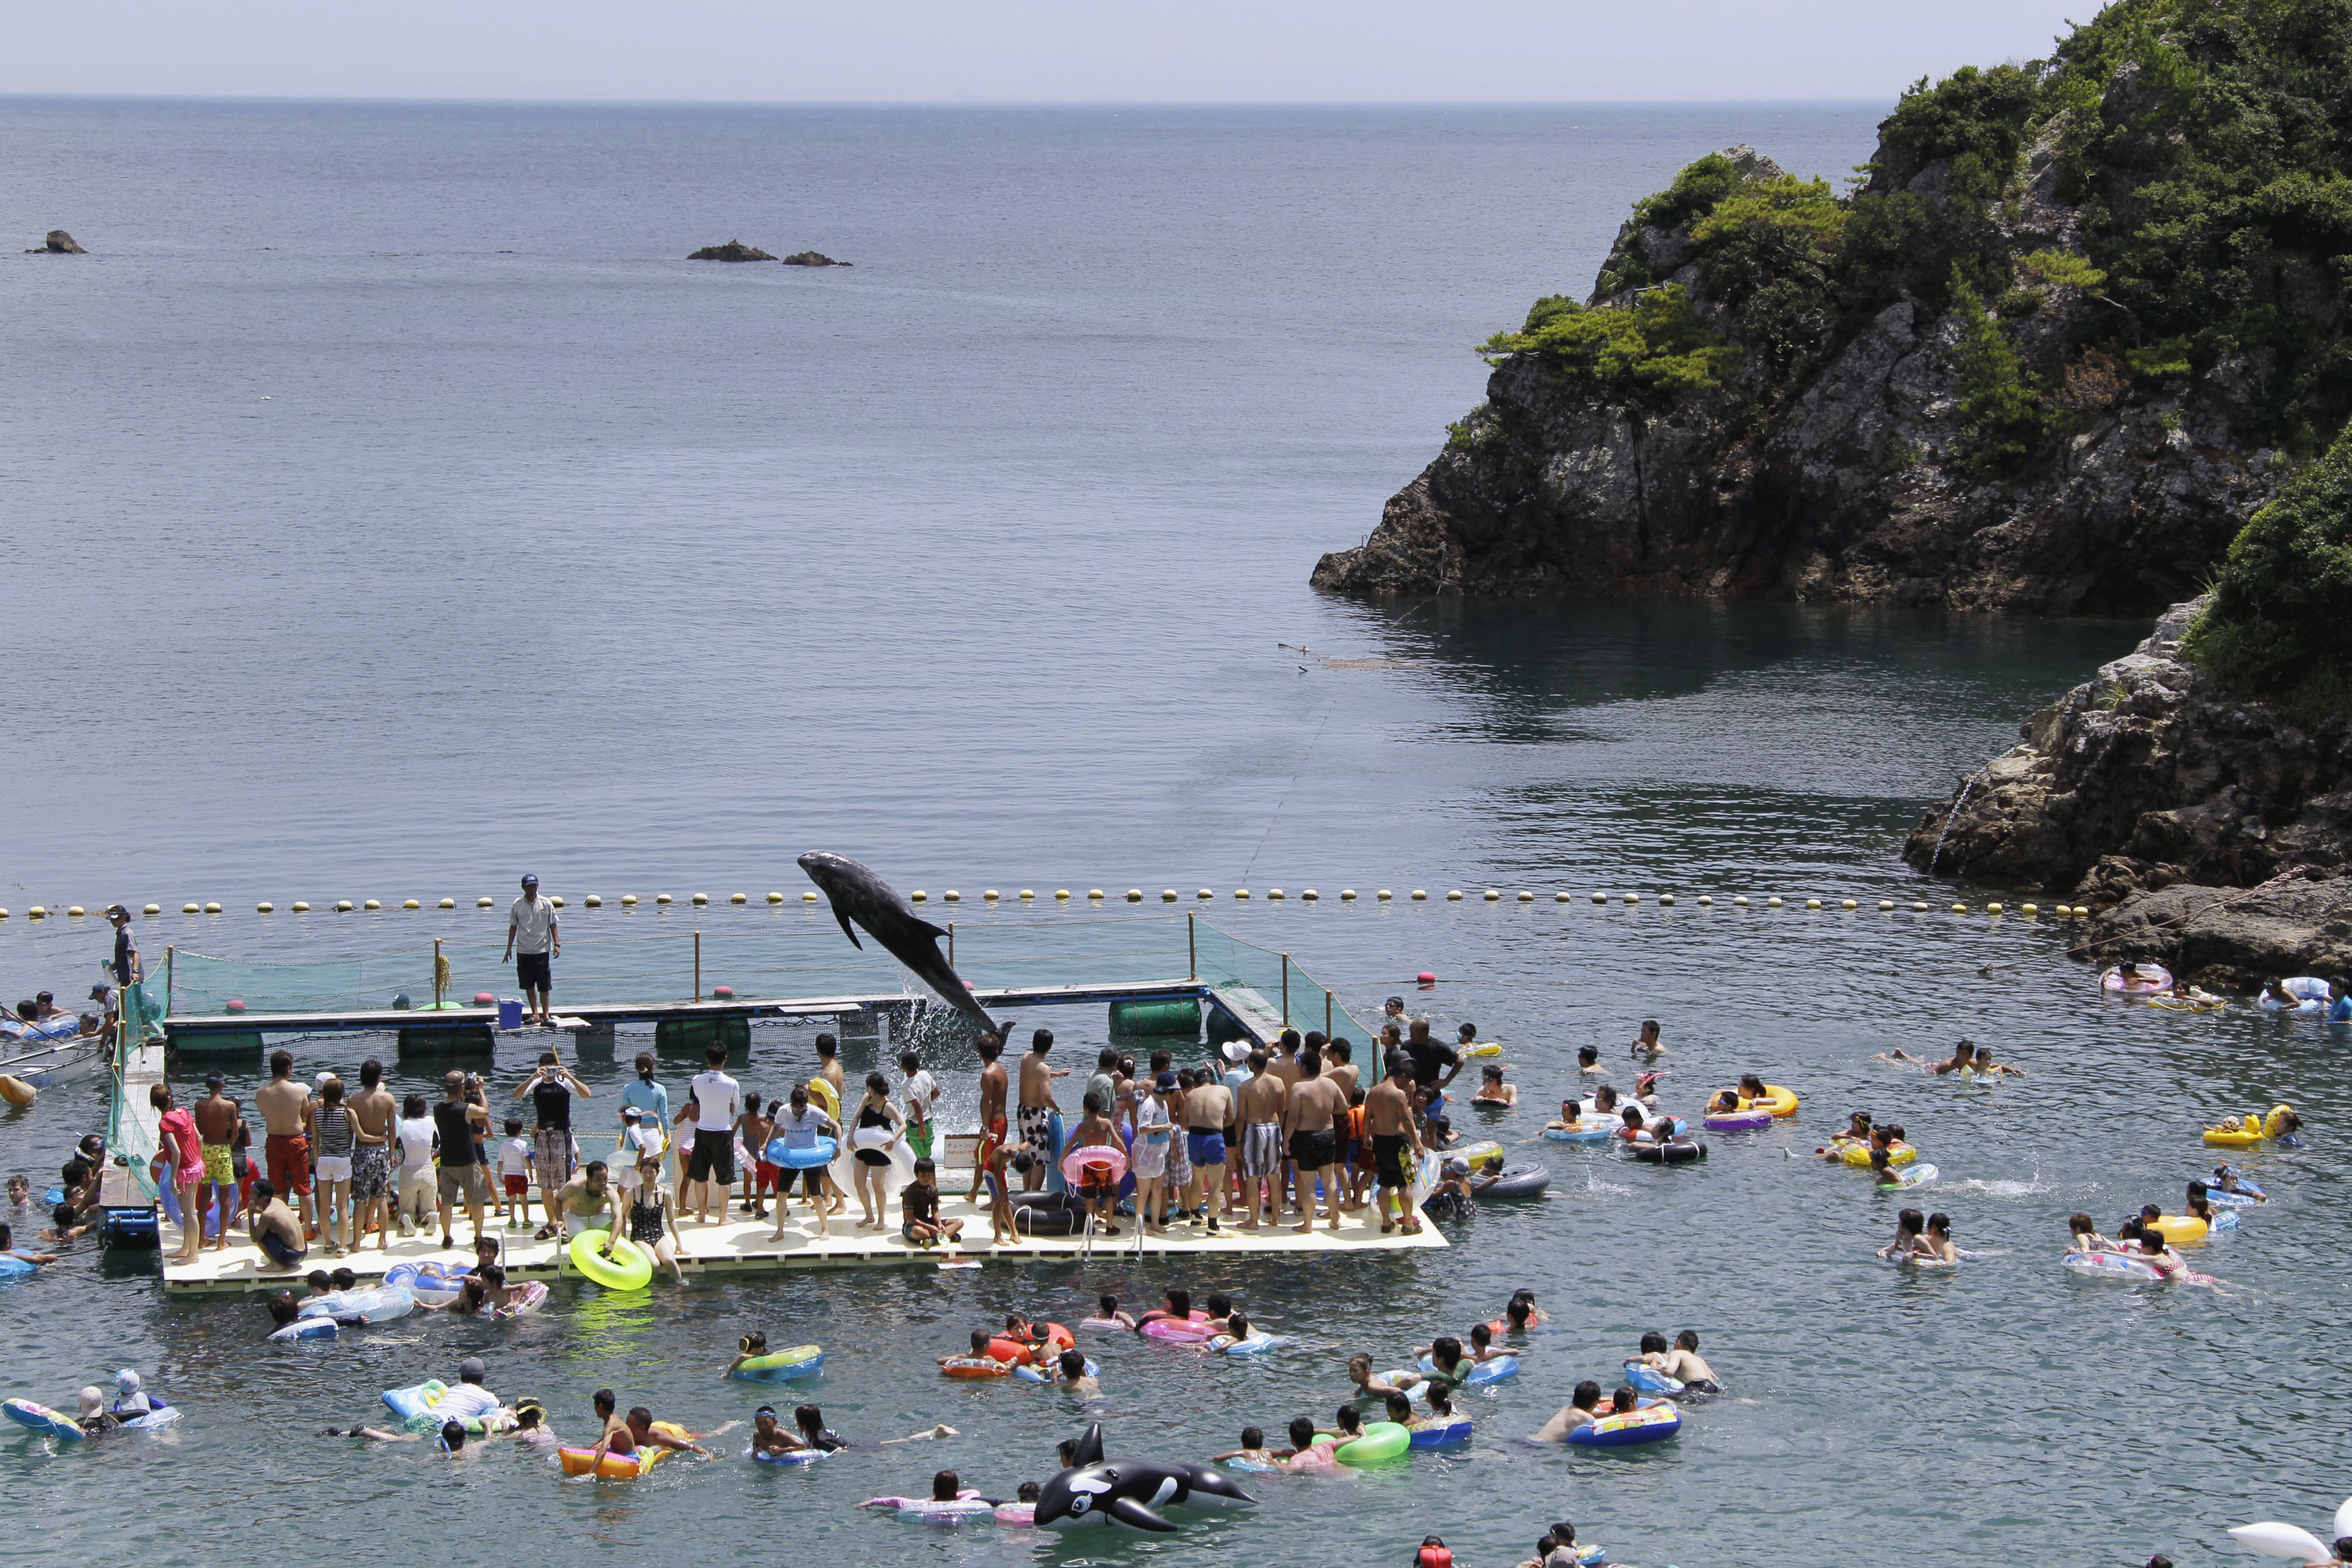 Captive audience: A Risso's dolphin jumps for tourists in a small cove in Taiji, Wakayama Prefecture. Each September, the waters of the cove turn red as it becomes a holding pen for the dolphin drive hunts. | AP